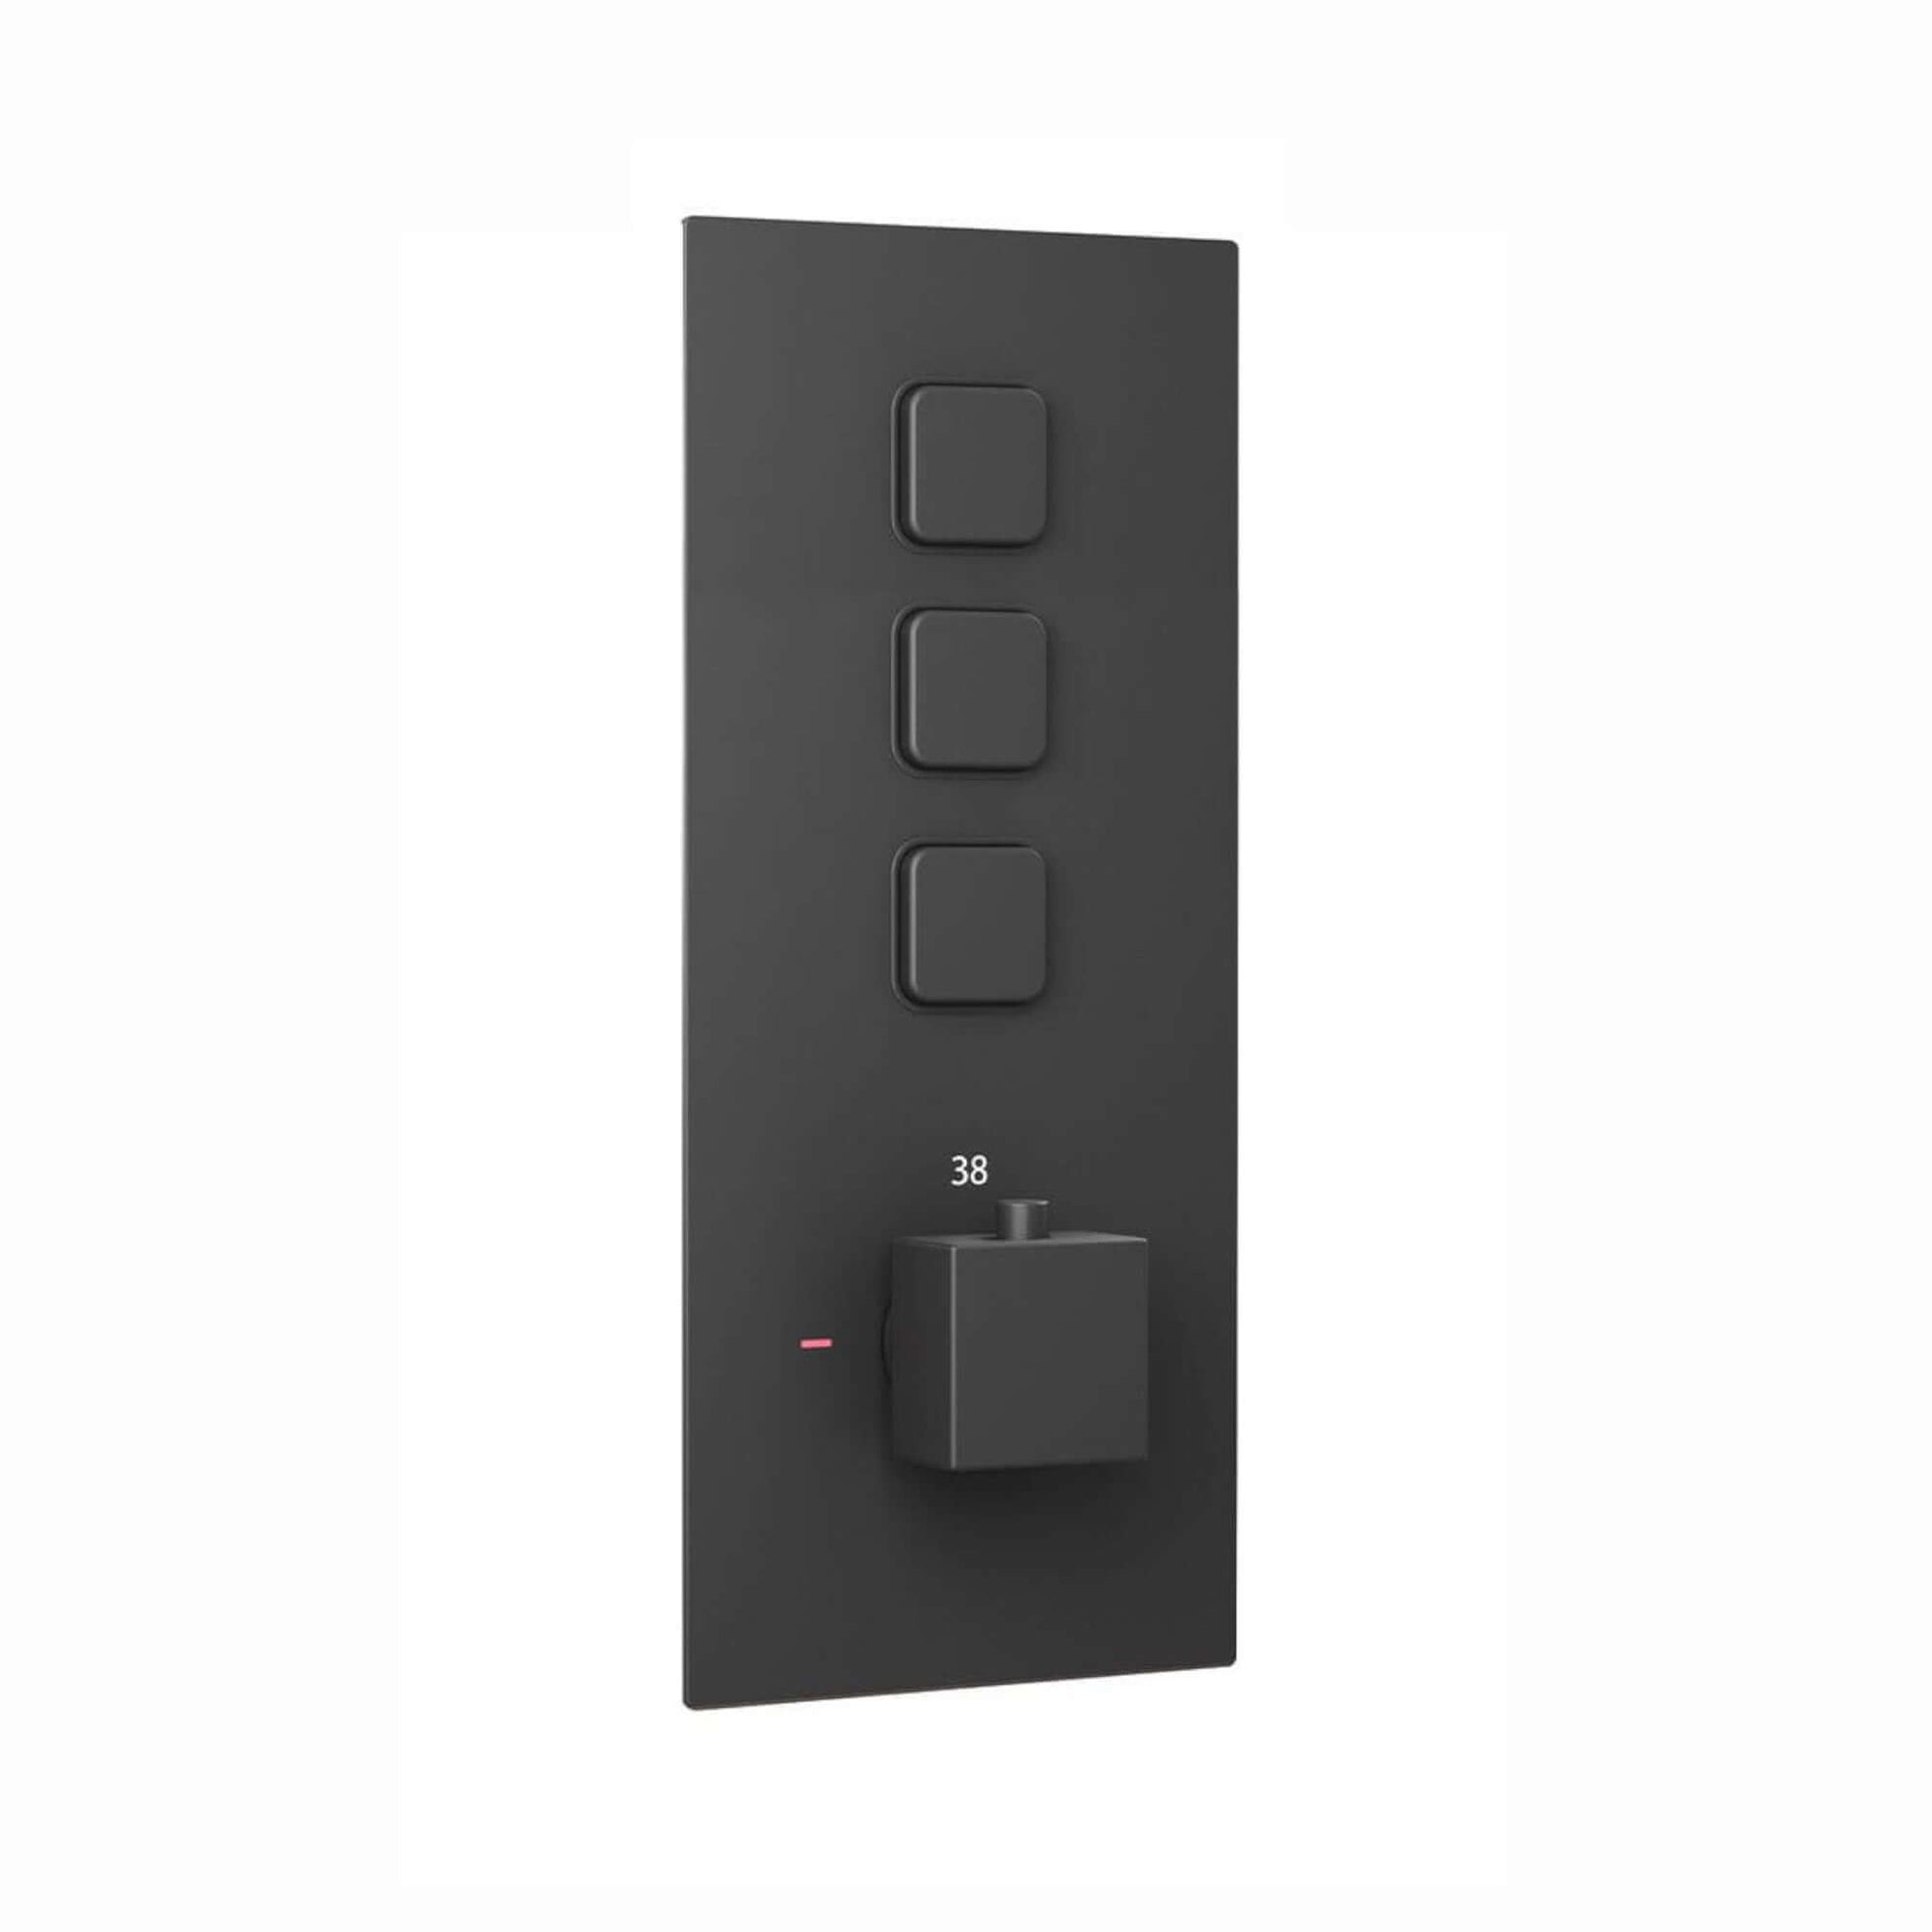 Milan square push button concealed thermostatic triple shower valve with 3 outlets - black - Showers